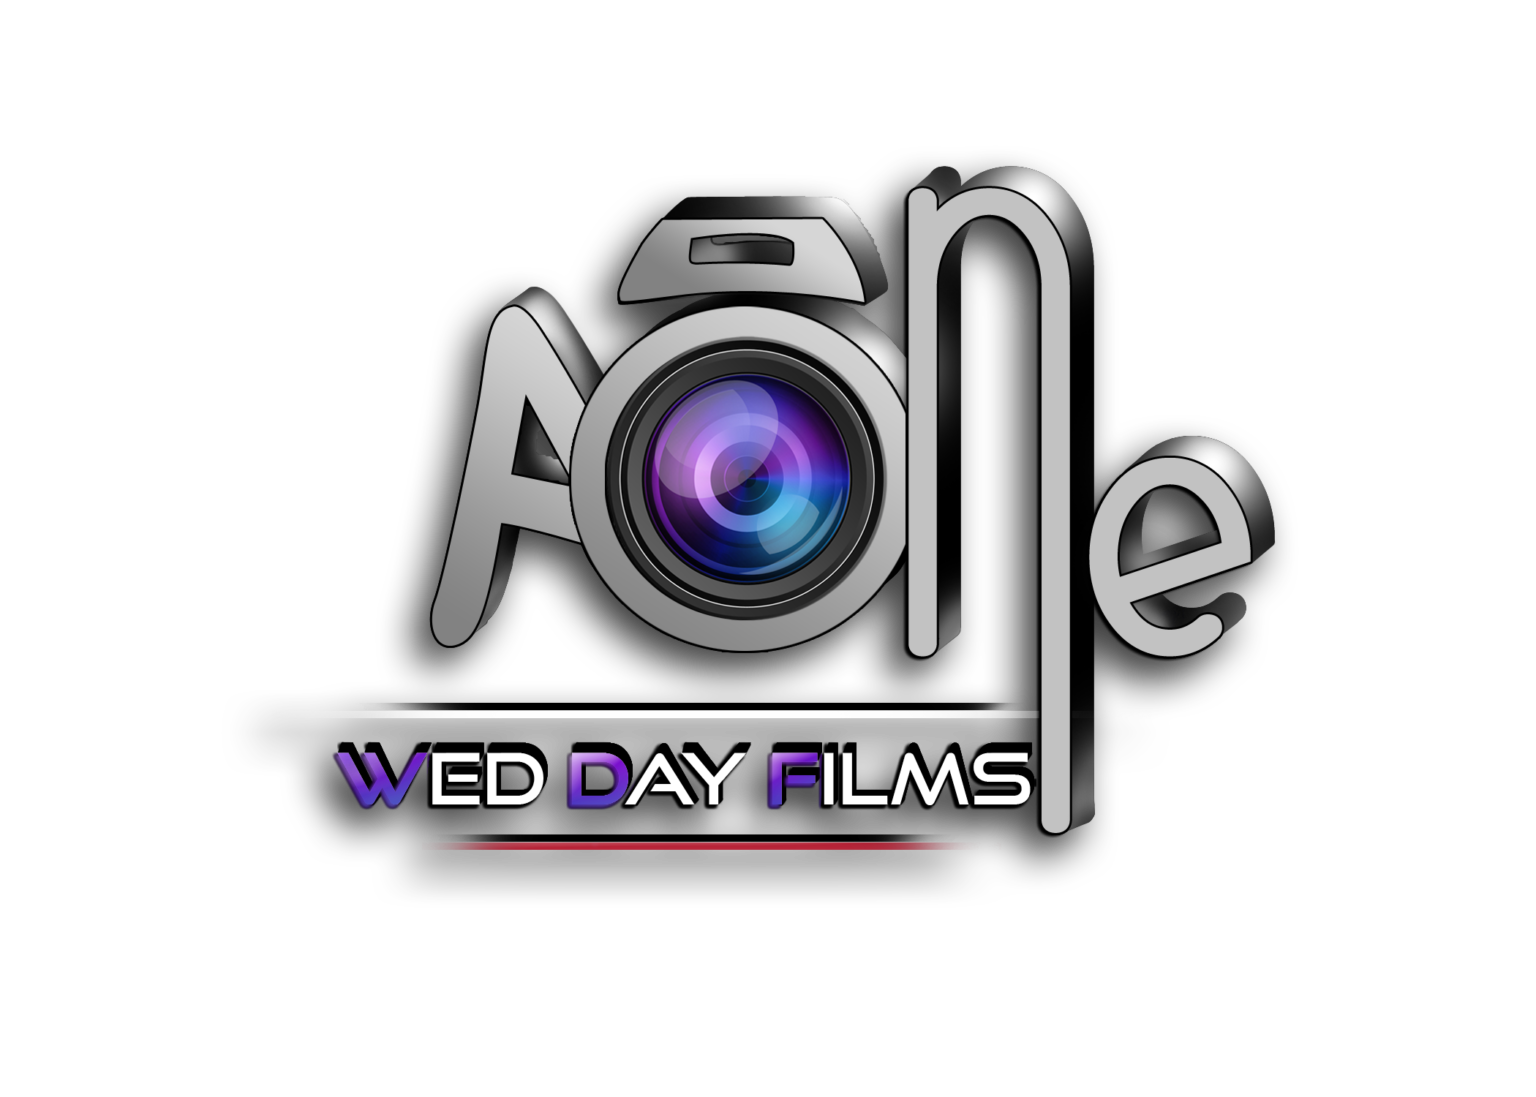 A-One Wed Day Films|Photographer|Event Services